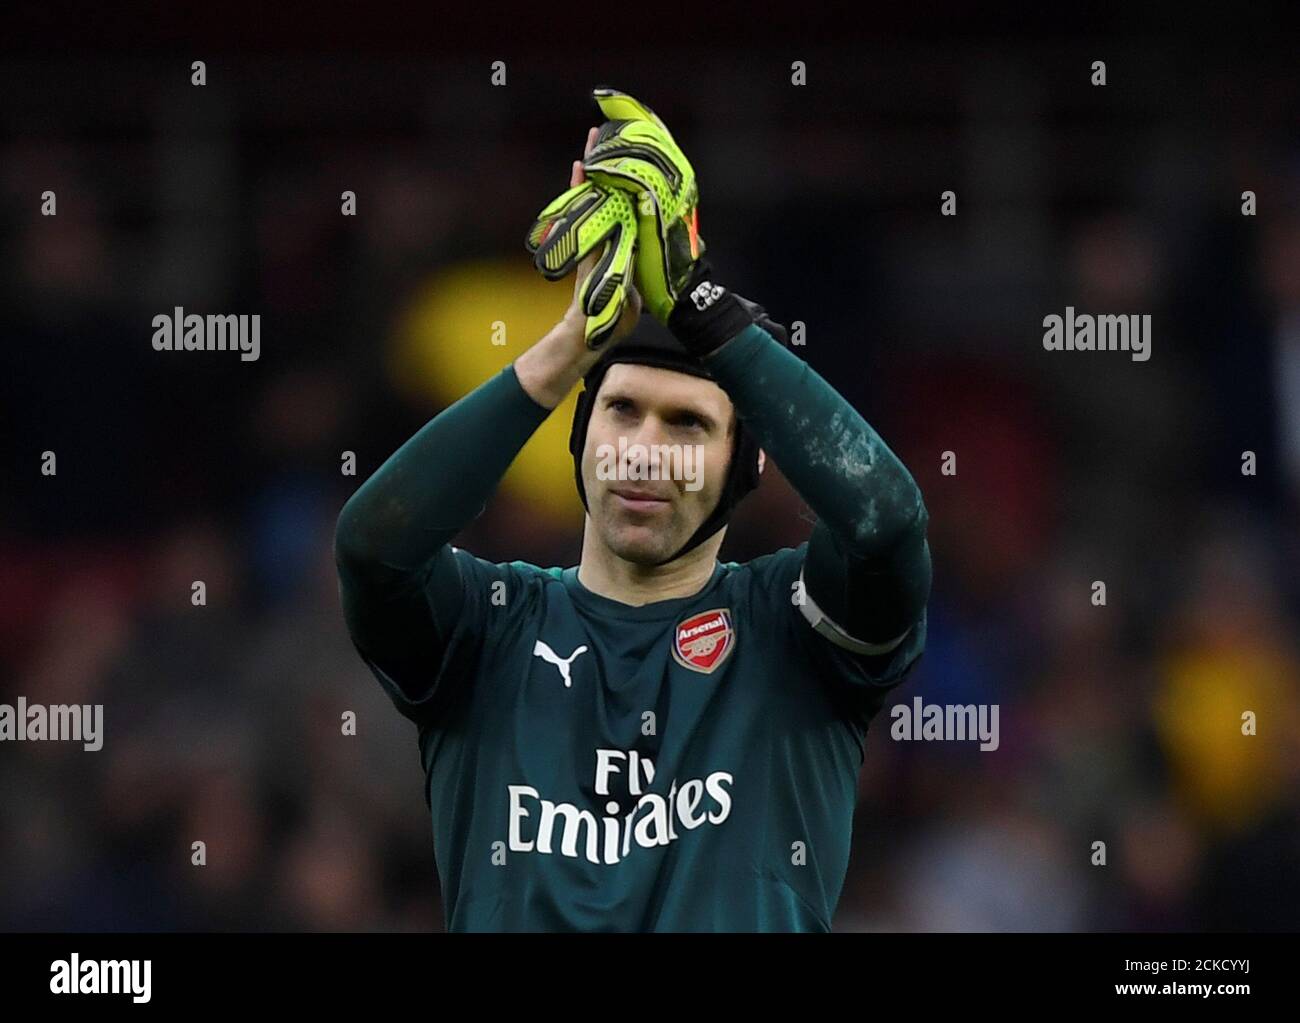 Soccer Football - Premier League - Arsenal vs Watford - Emirates Stadium, London, Britain - March 11, 2018   Arsenal's Petr Cech applauds fans after the match     Action Images via Reuters/Tony O'Brien    EDITORIAL USE ONLY. No use with unauthorized audio, video, data, fixture lists, club/league logos or 'live' services. Online in-match use limited to 75 images, no video emulation. No use in betting, games or single club/league/player publications.  Please contact your account representative for further details. Stock Photo